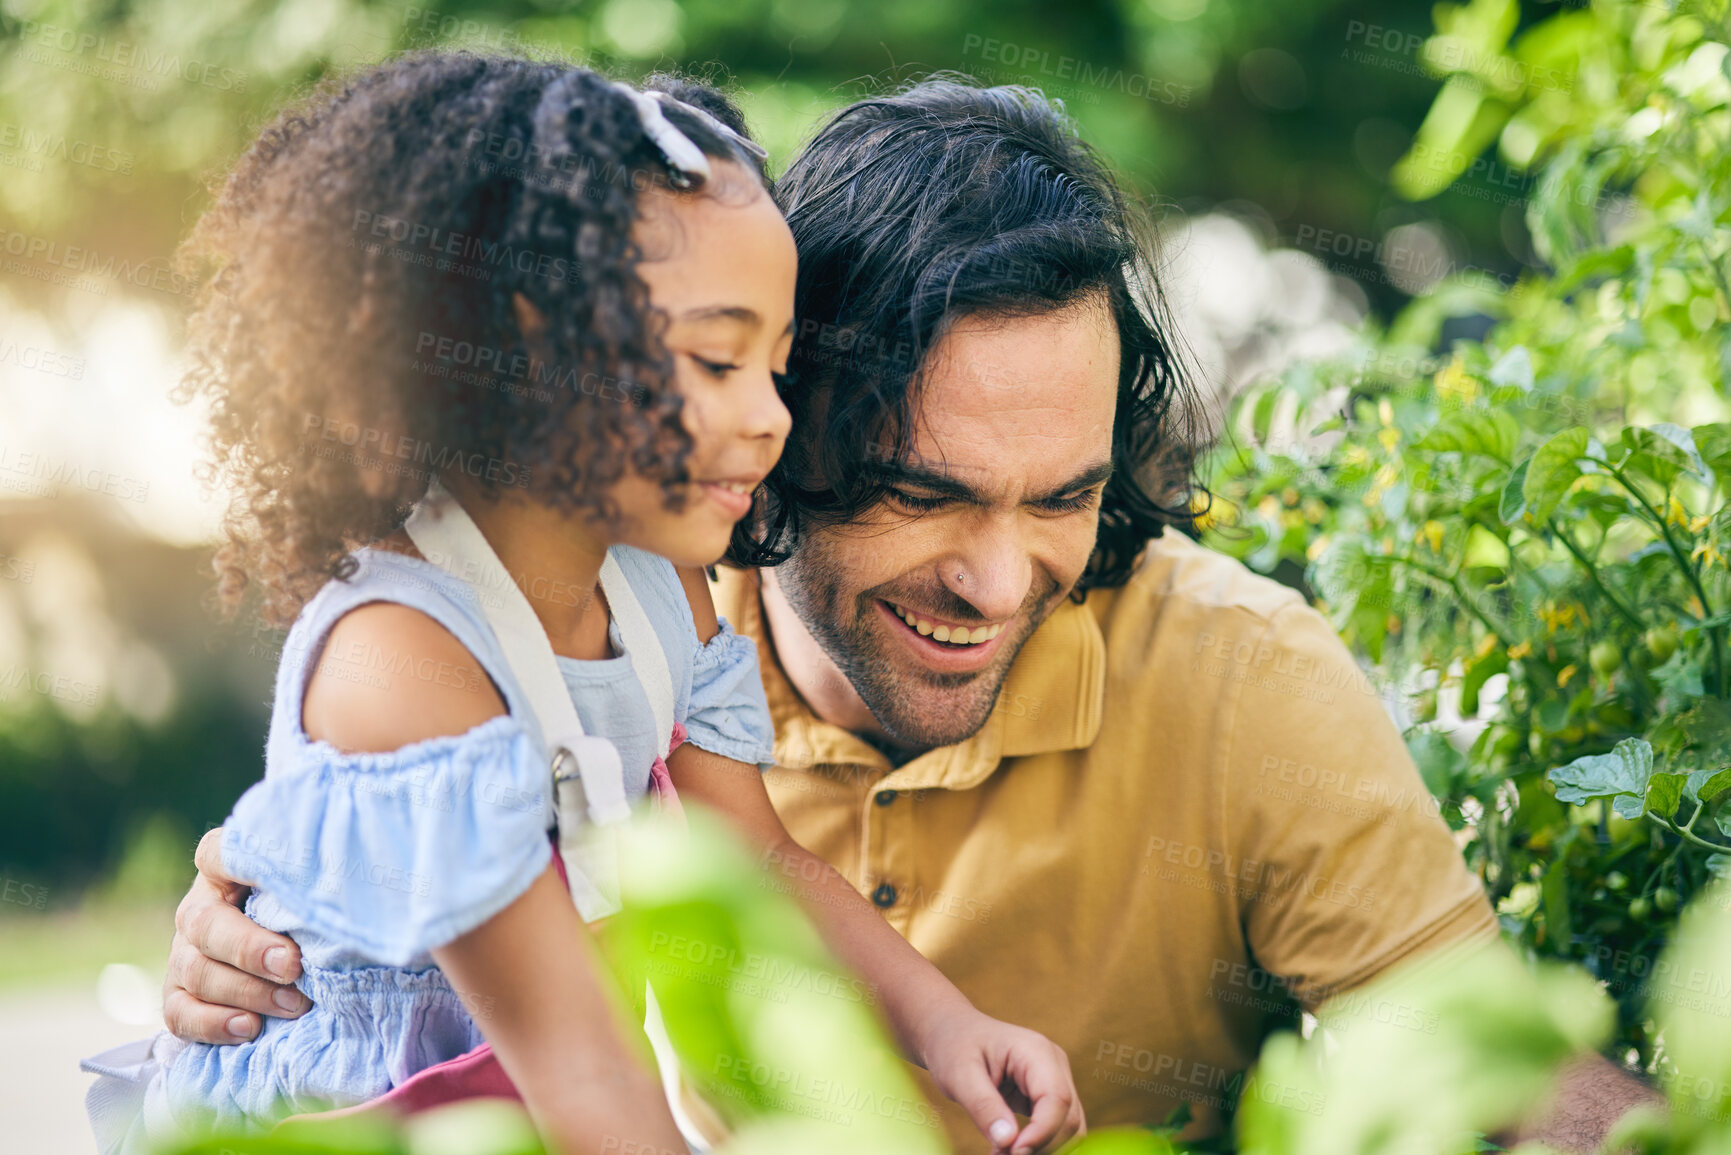 Buy stock photo Gardening, dad and child smile with plants, teaching and learning with growth in nature together. Backyard, sustainability and father helping daughter in vegetable garden with love, support and fun.